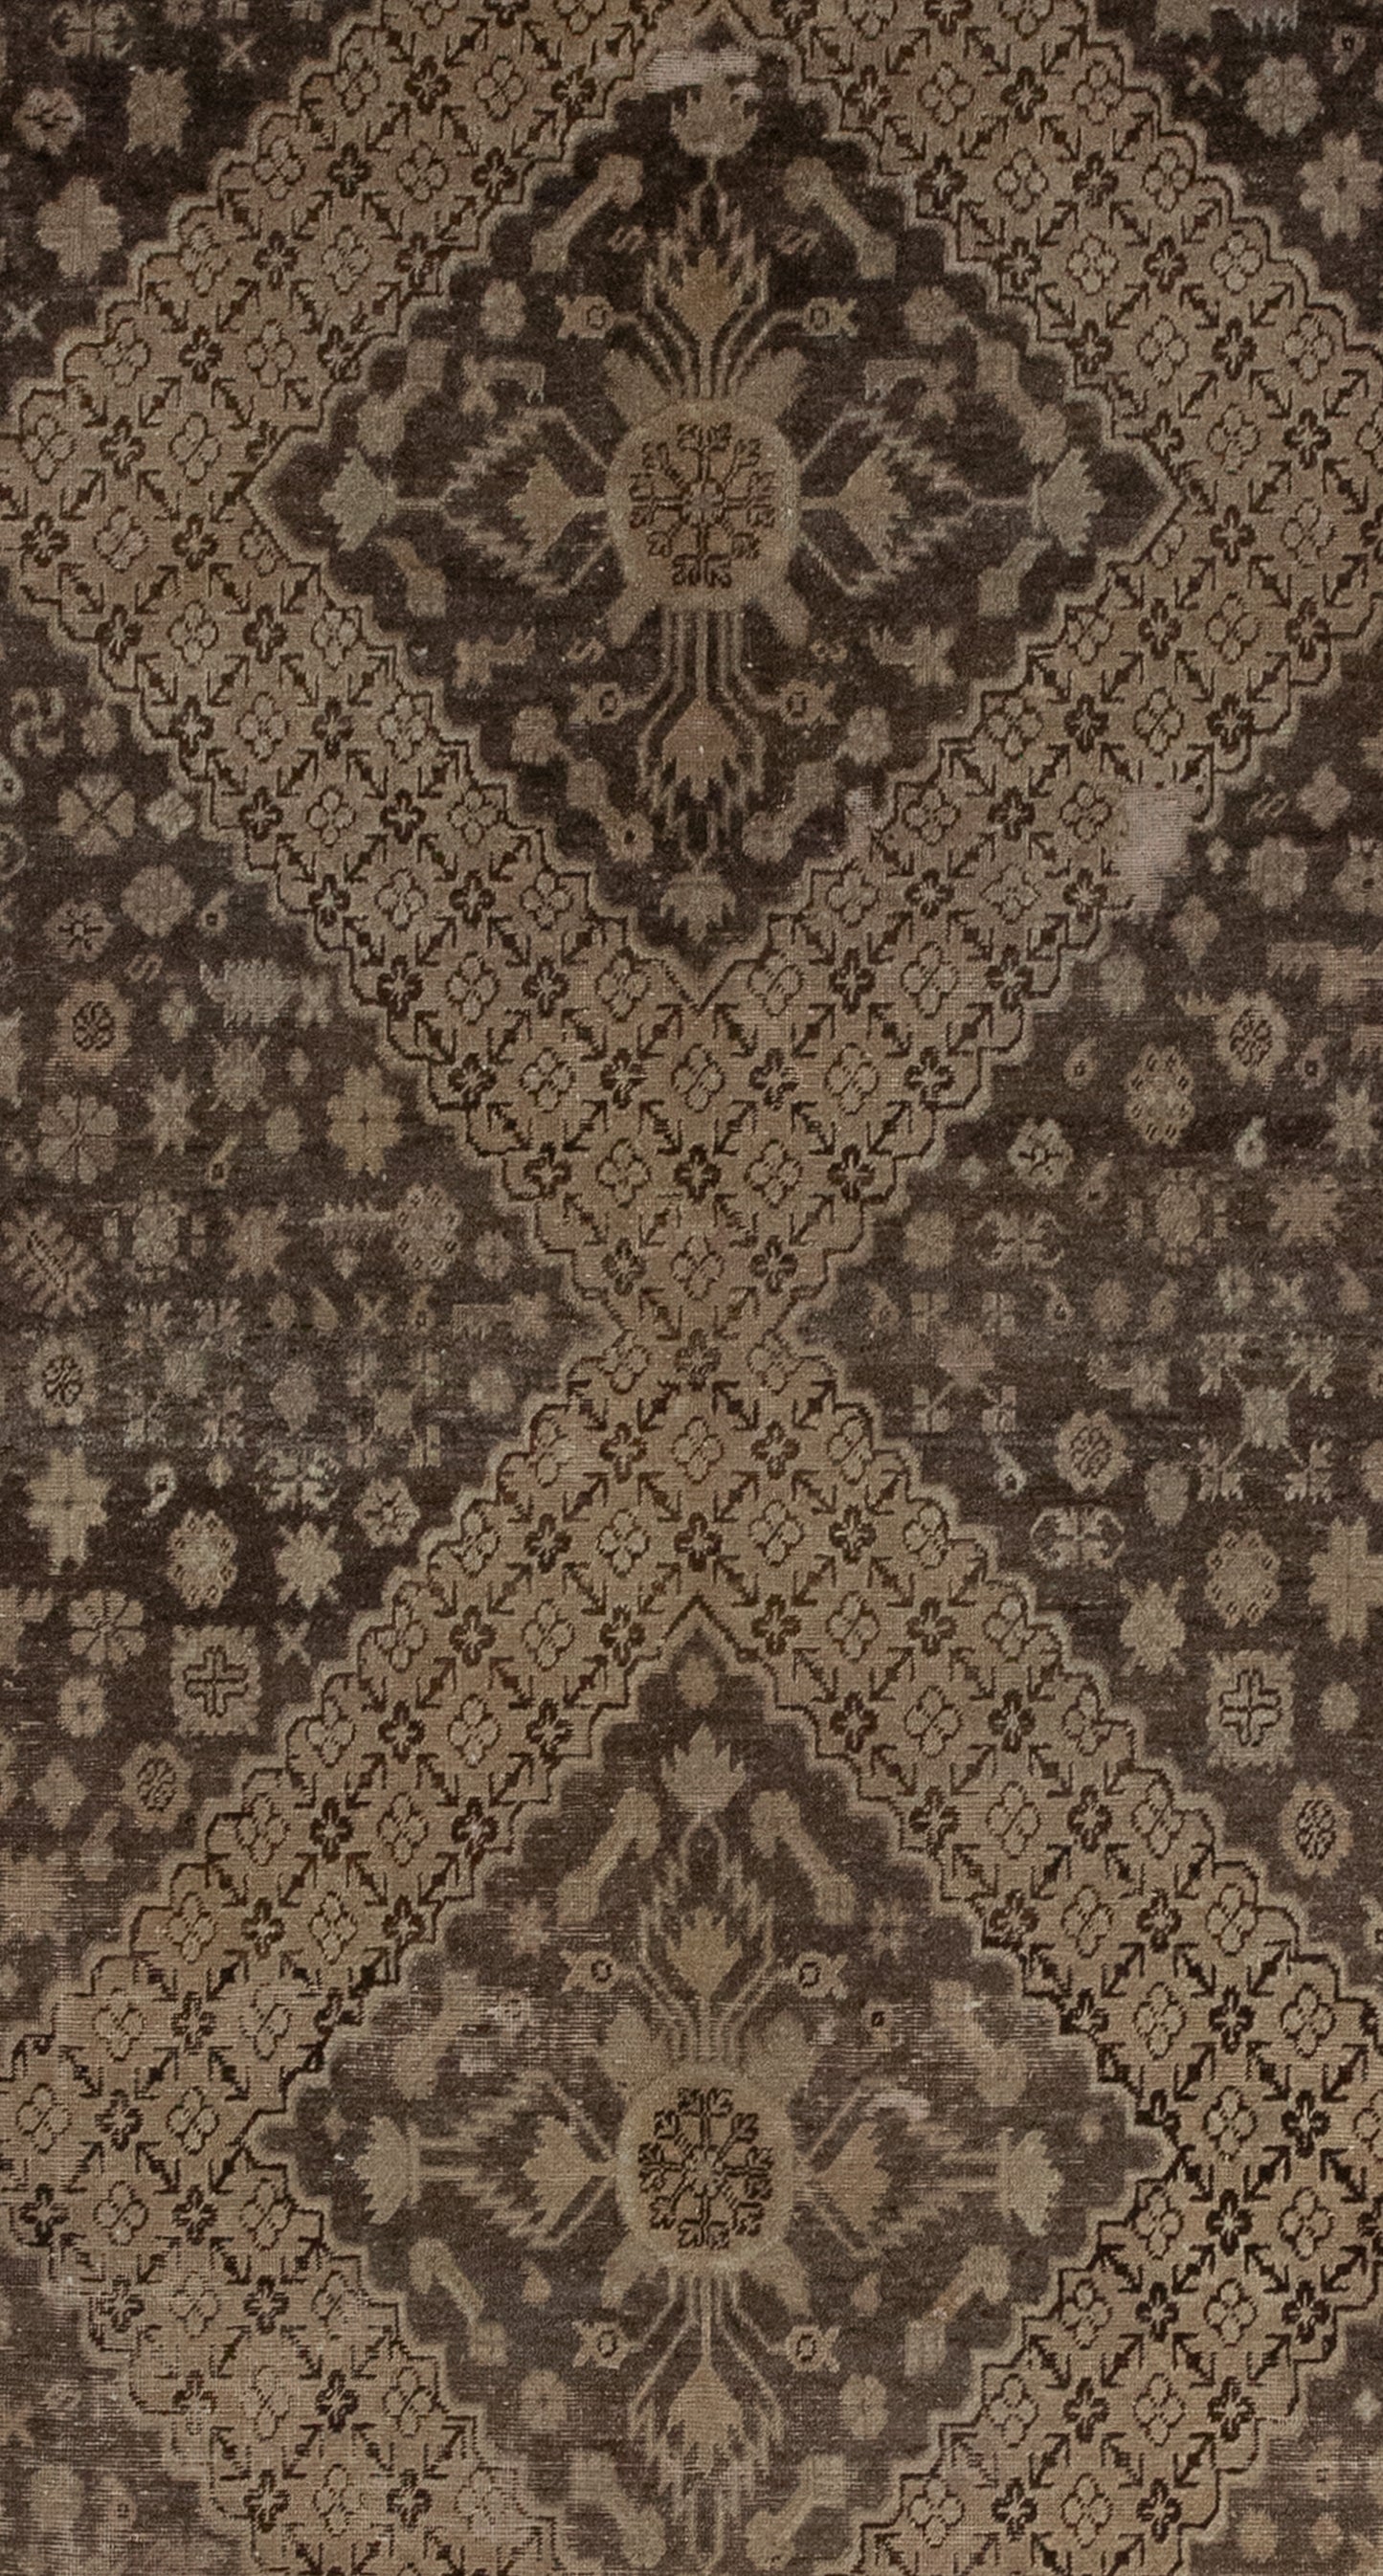 The close-up of the carpet displays the beauty of the uniformity of the pattern and its contrast.